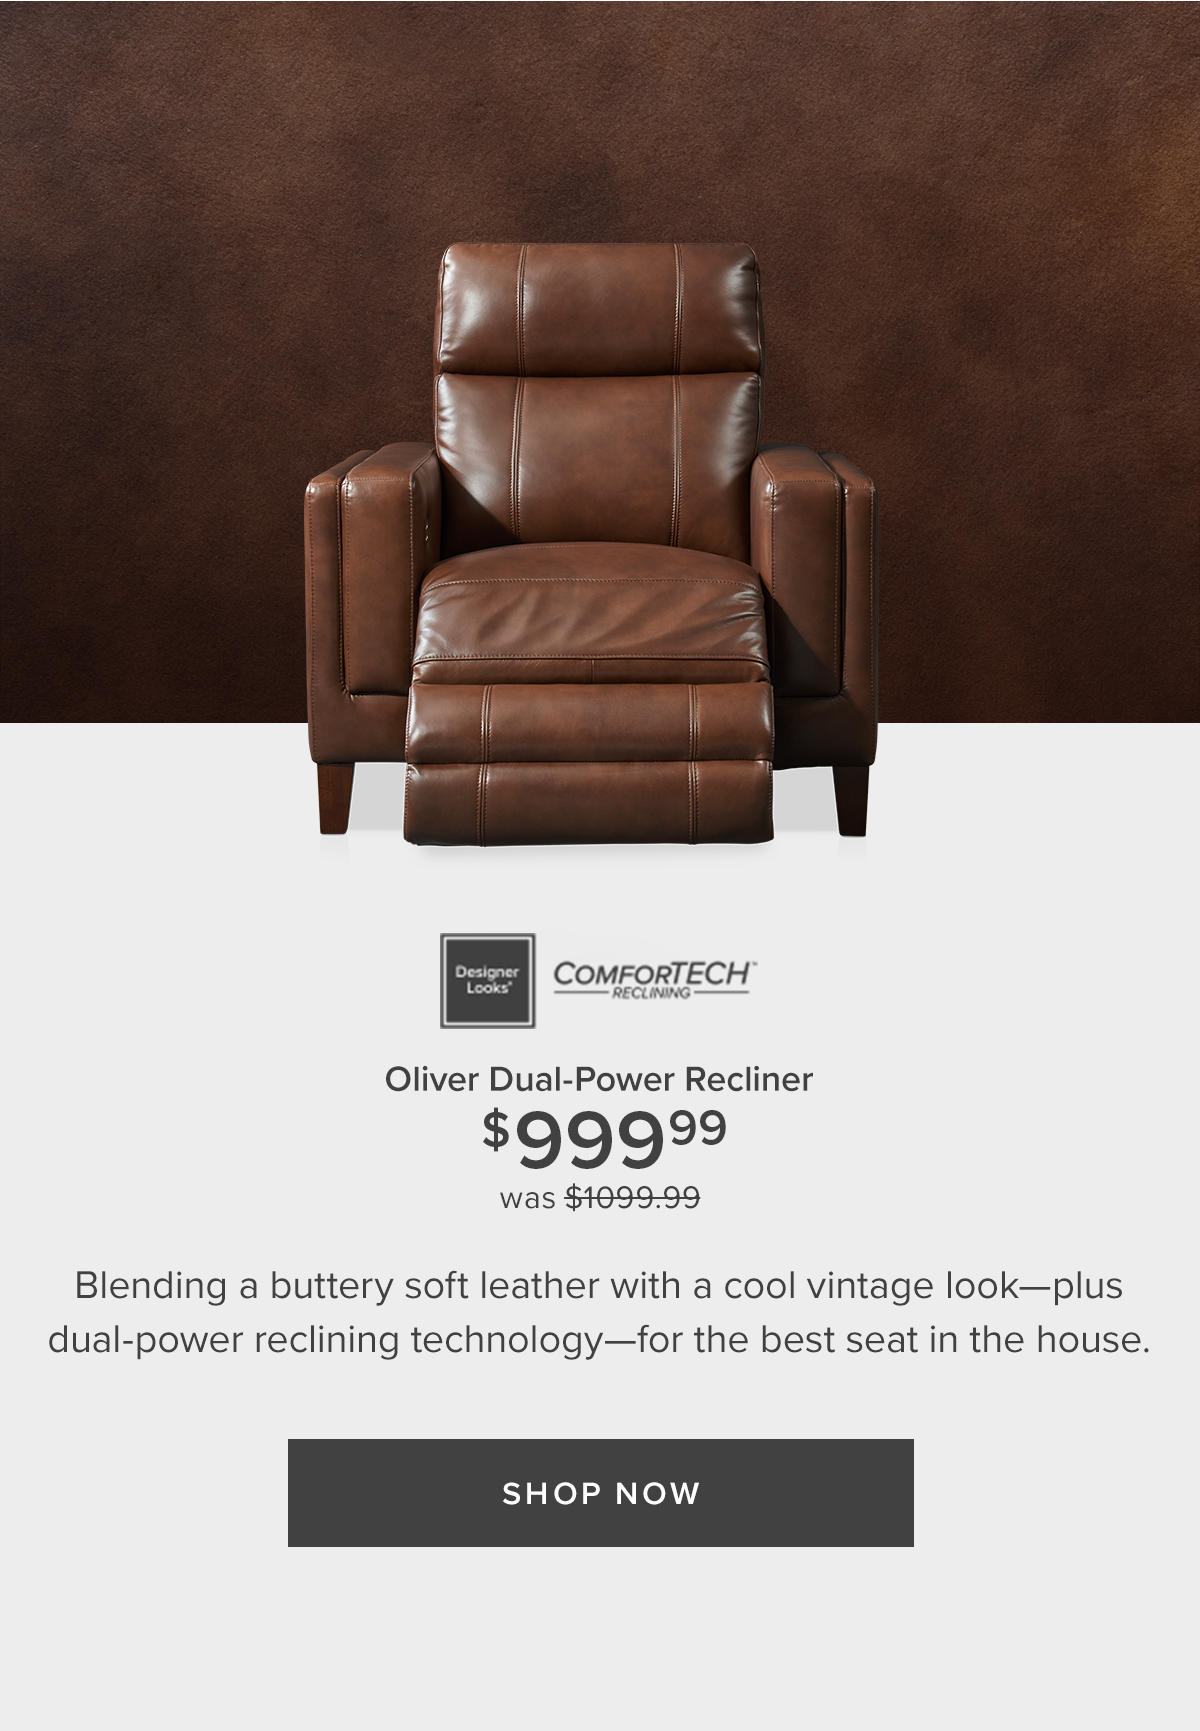 Oliver Dual-Power Recliner